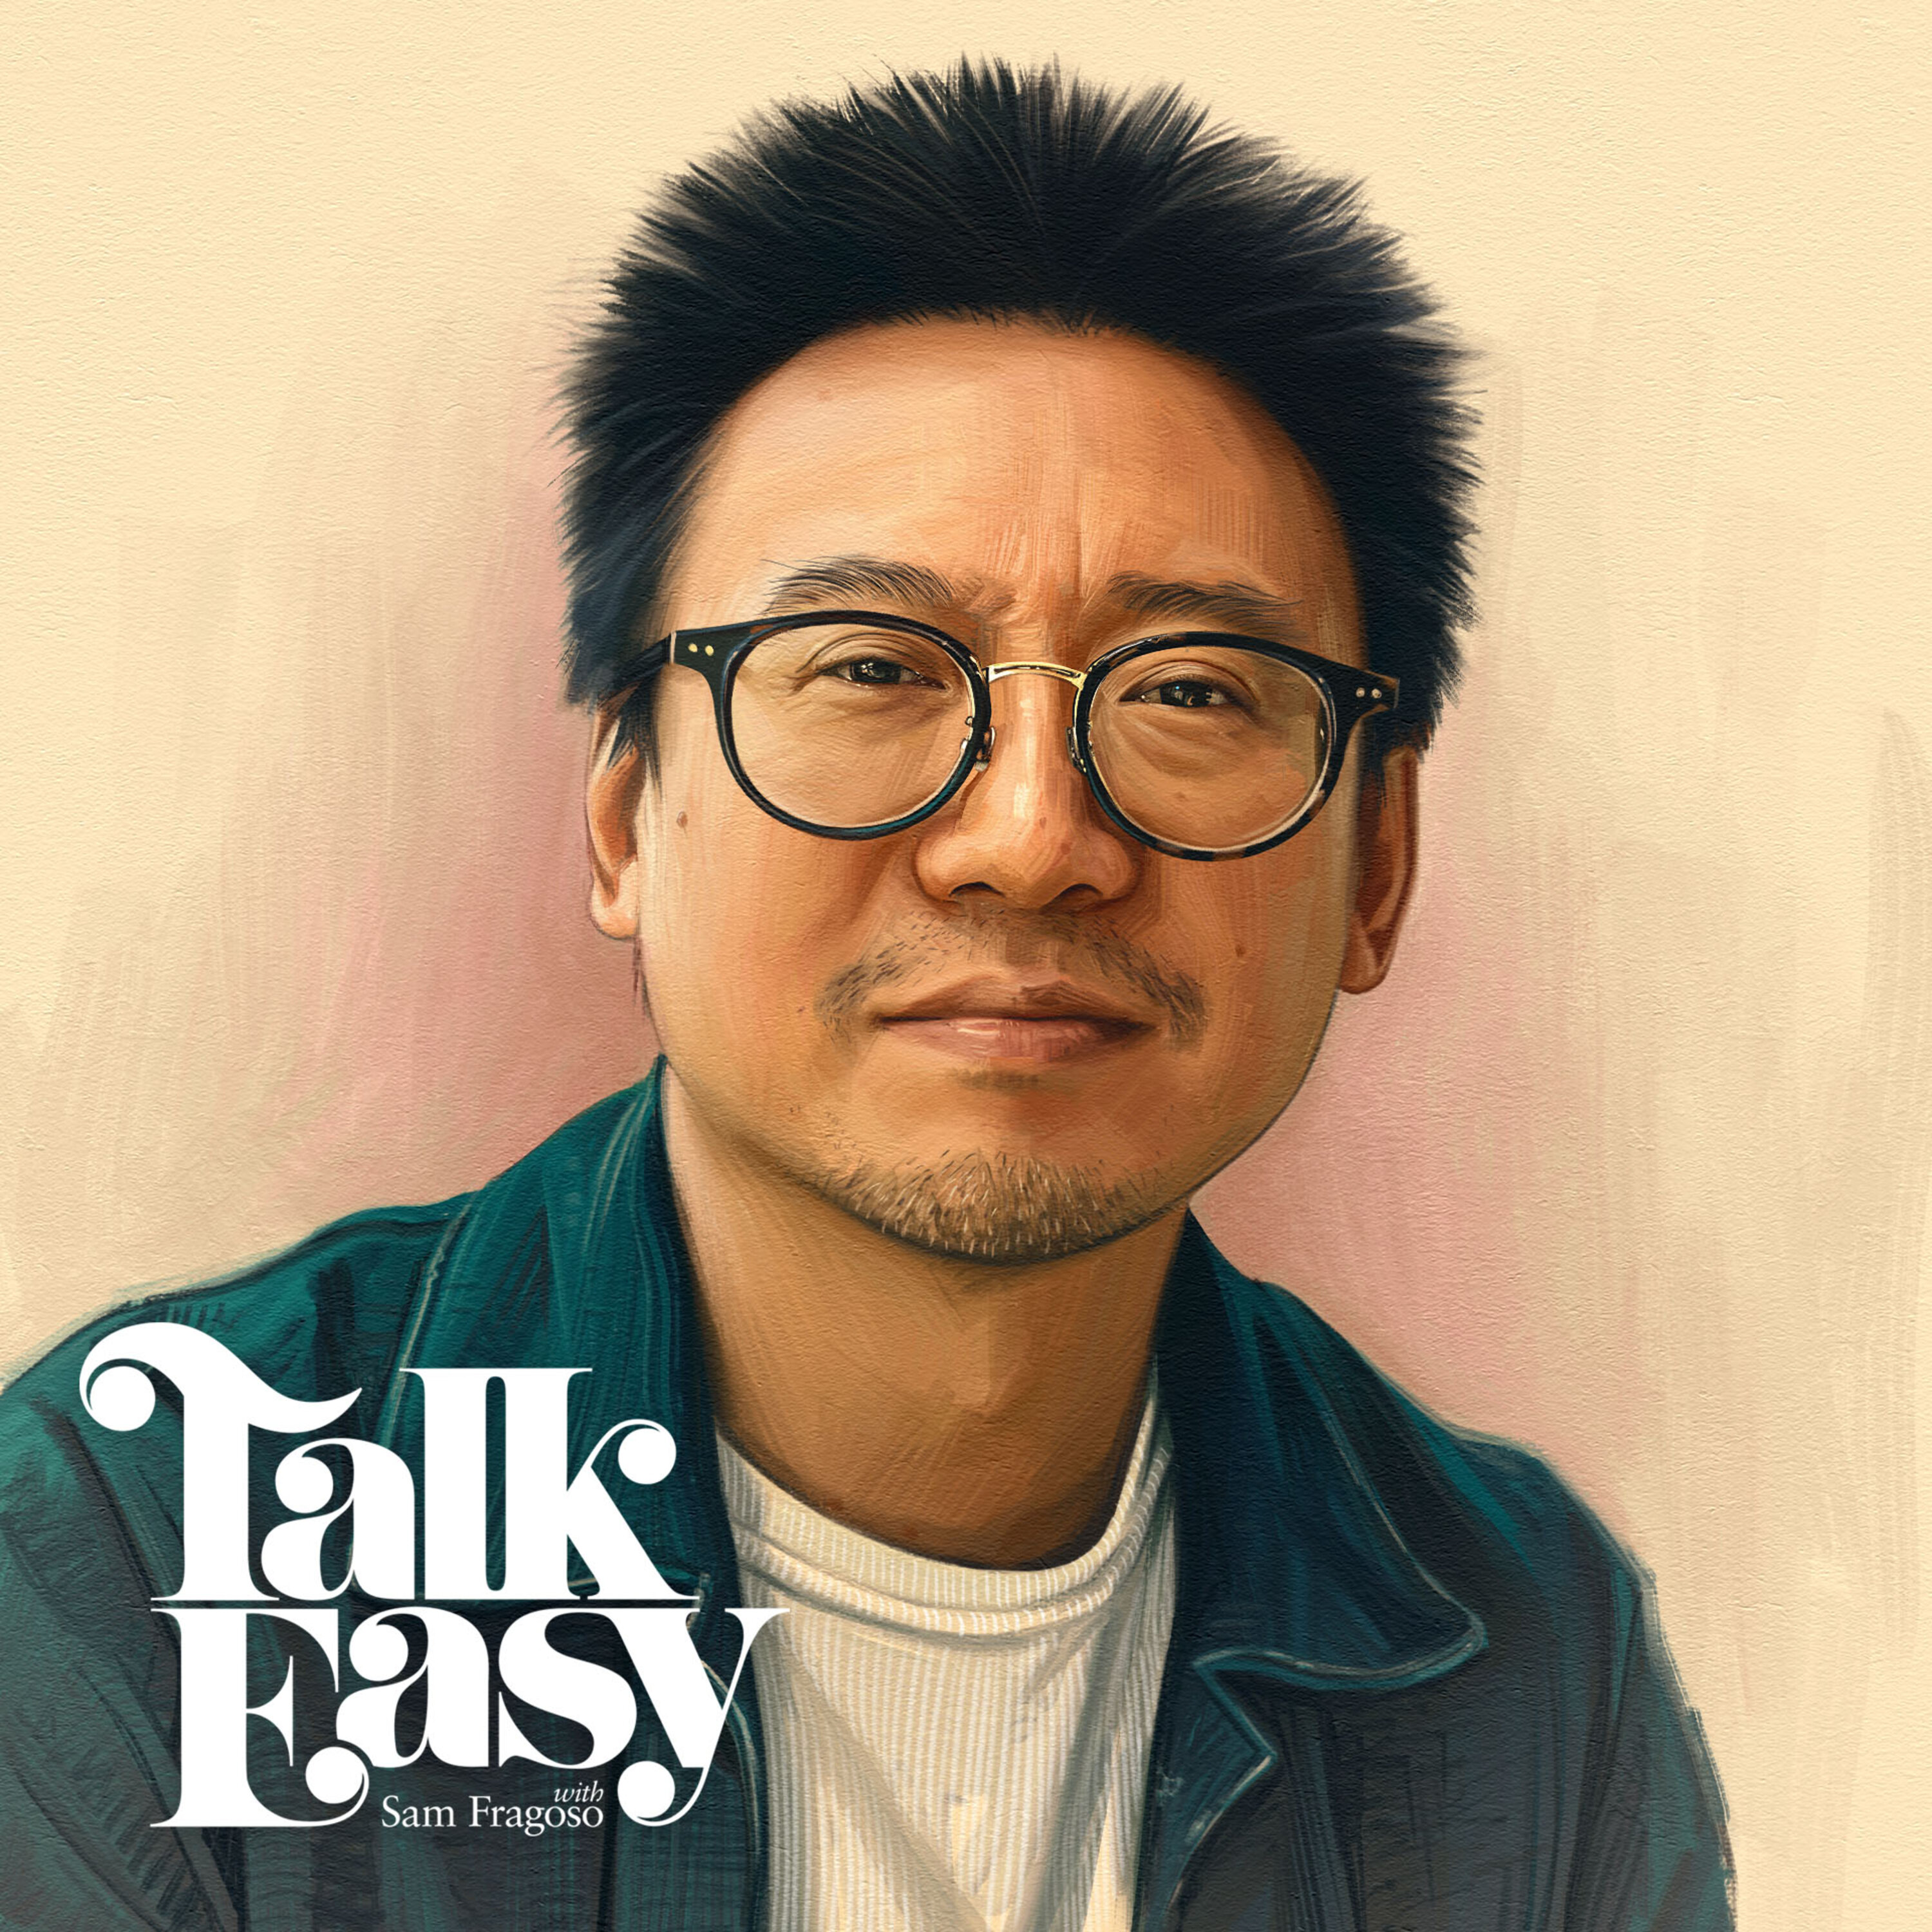 Author and Critic Hua Hsu (The New Yorker) ‘Stays True’